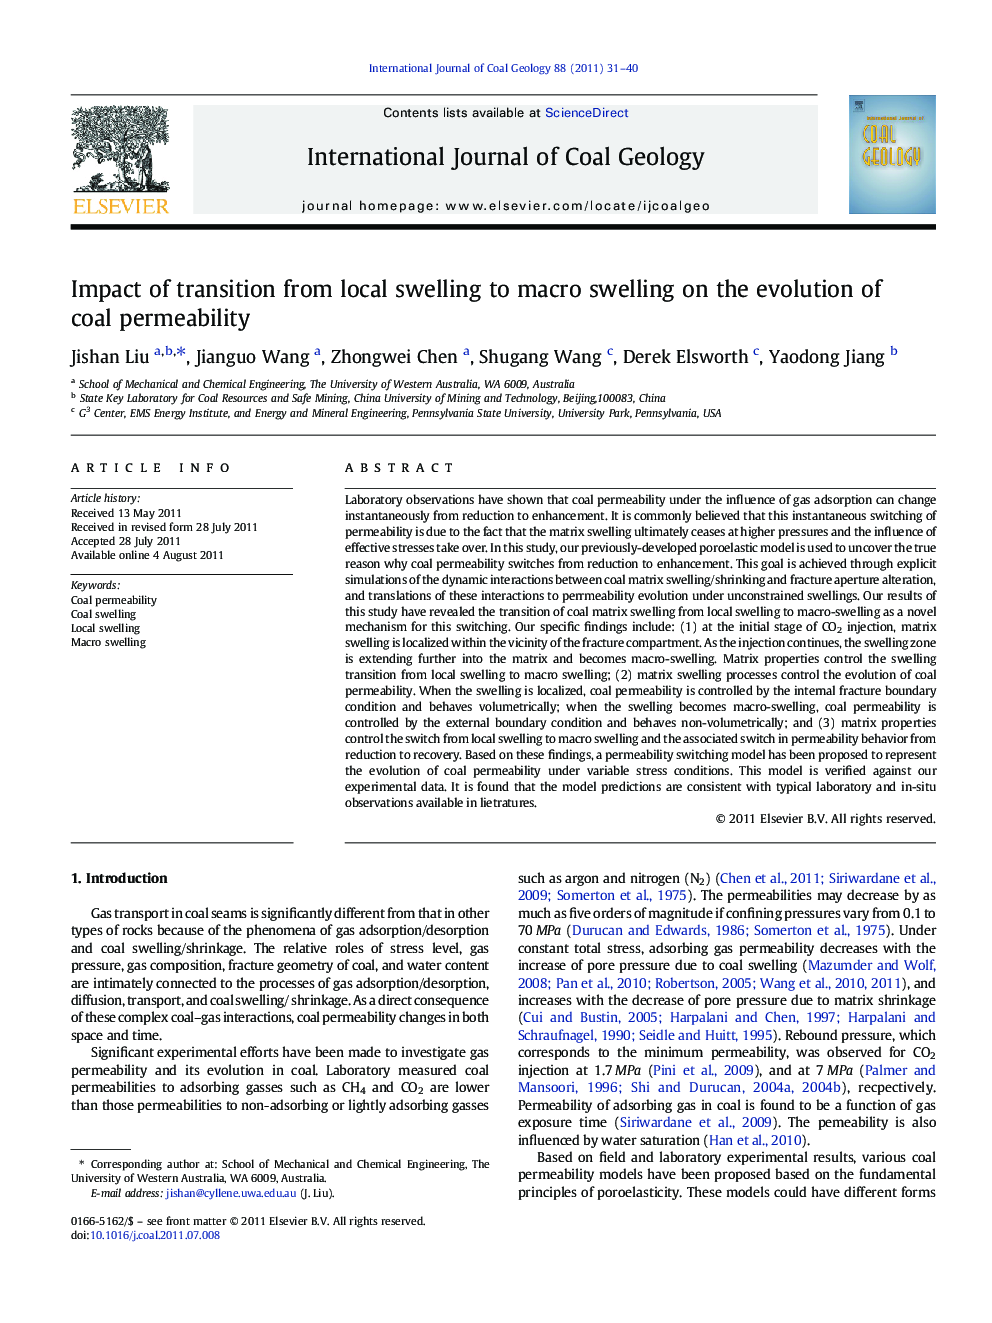 Impact of transition from local swelling to macro swelling on the evolution of coal permeability